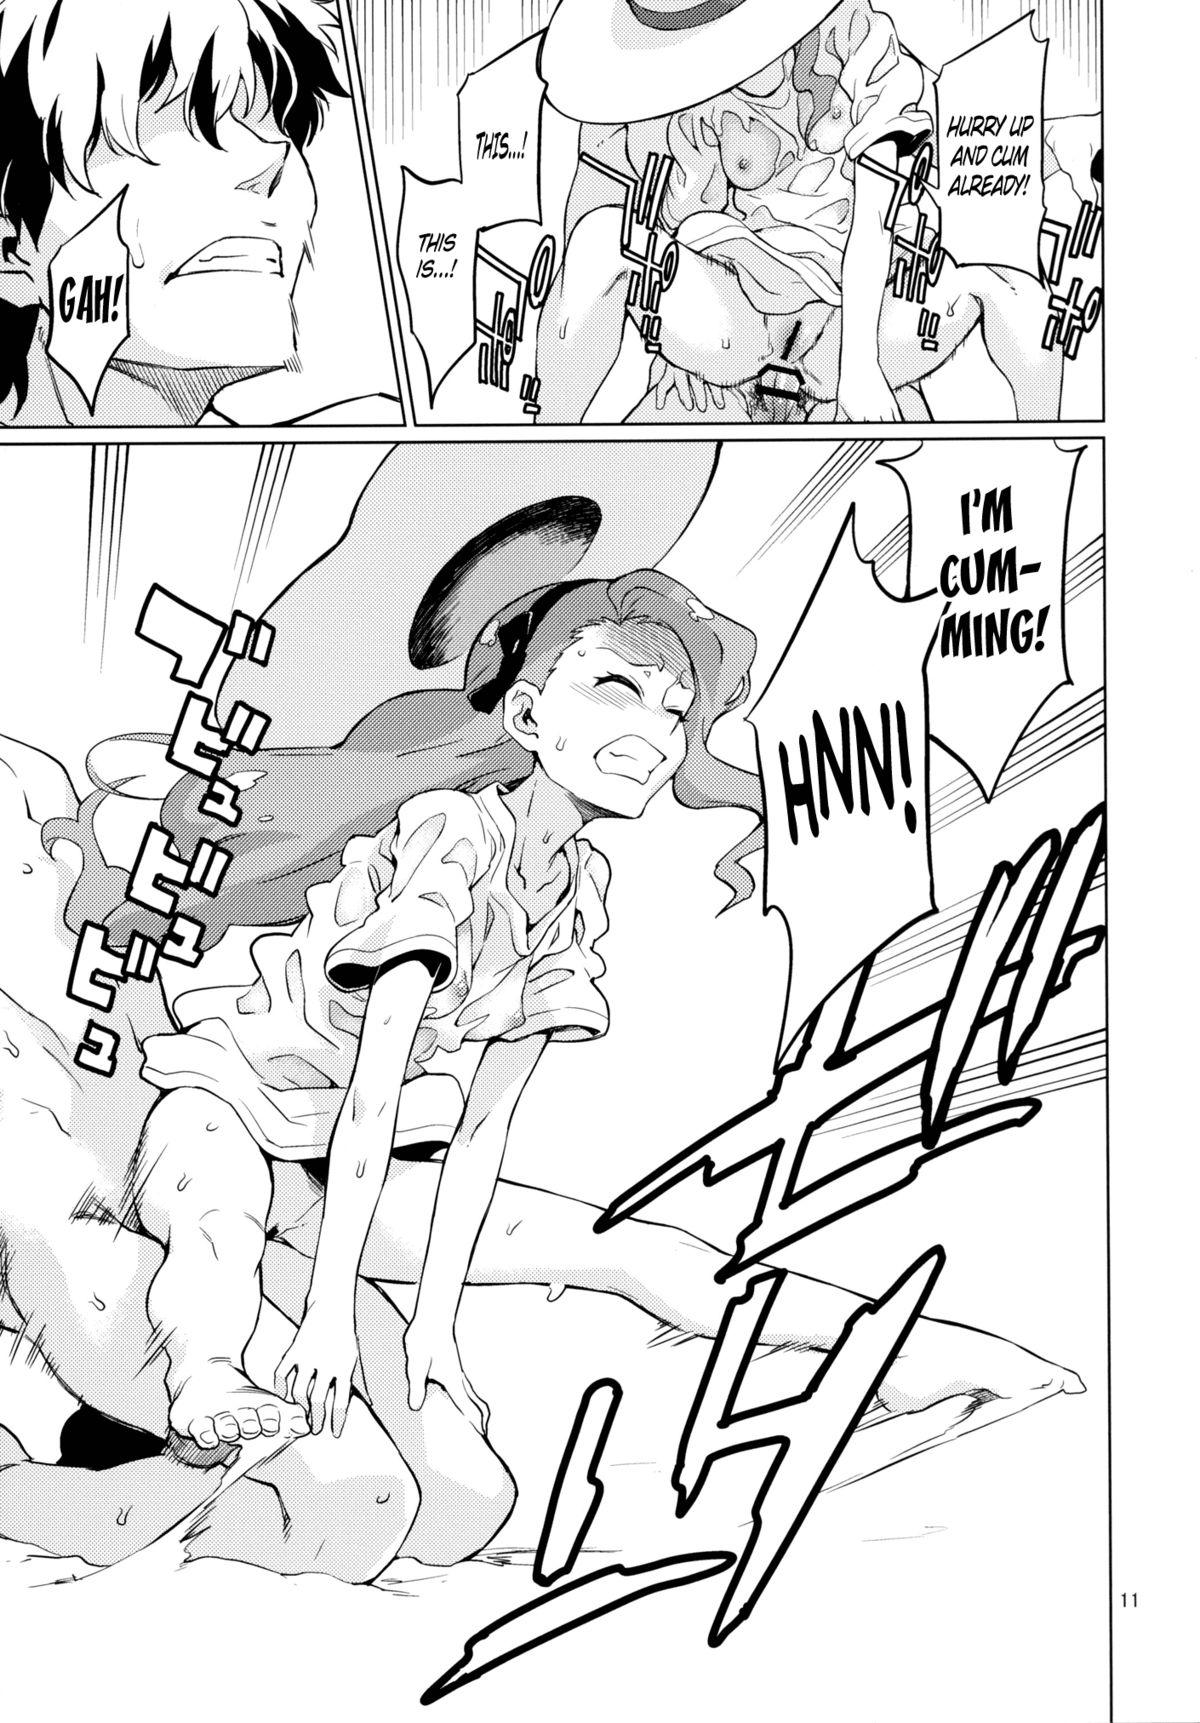 Ghetto Shima-Hen | Island Edition - The idolmaster Reversecowgirl - Page 12